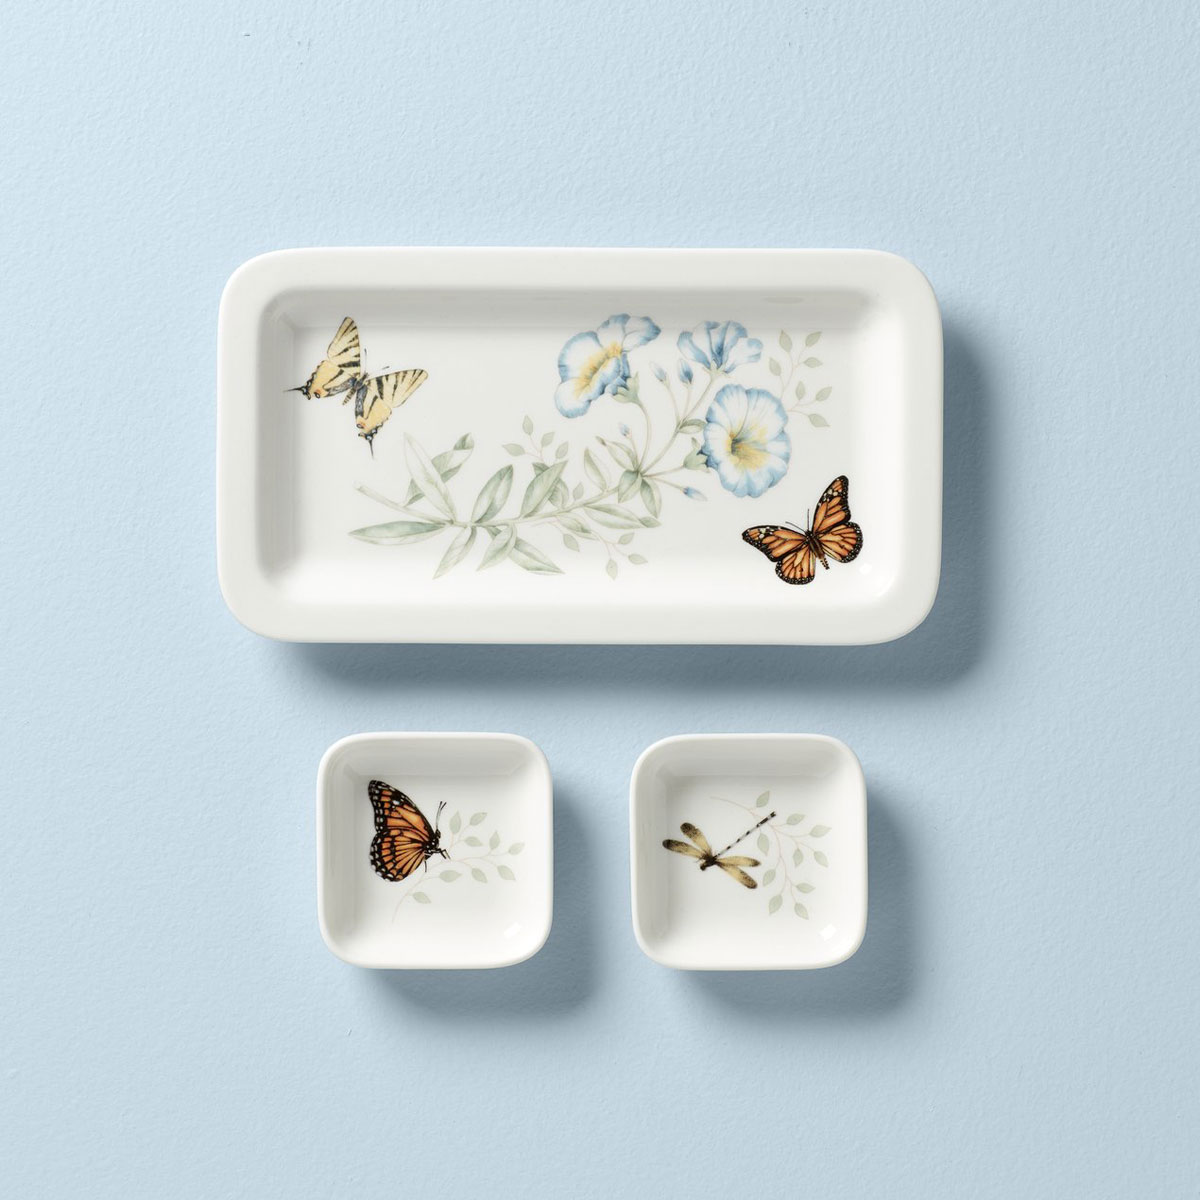 Lenox Butterfly Meadow Sushi Plate with 2 Dip Bowls, Set